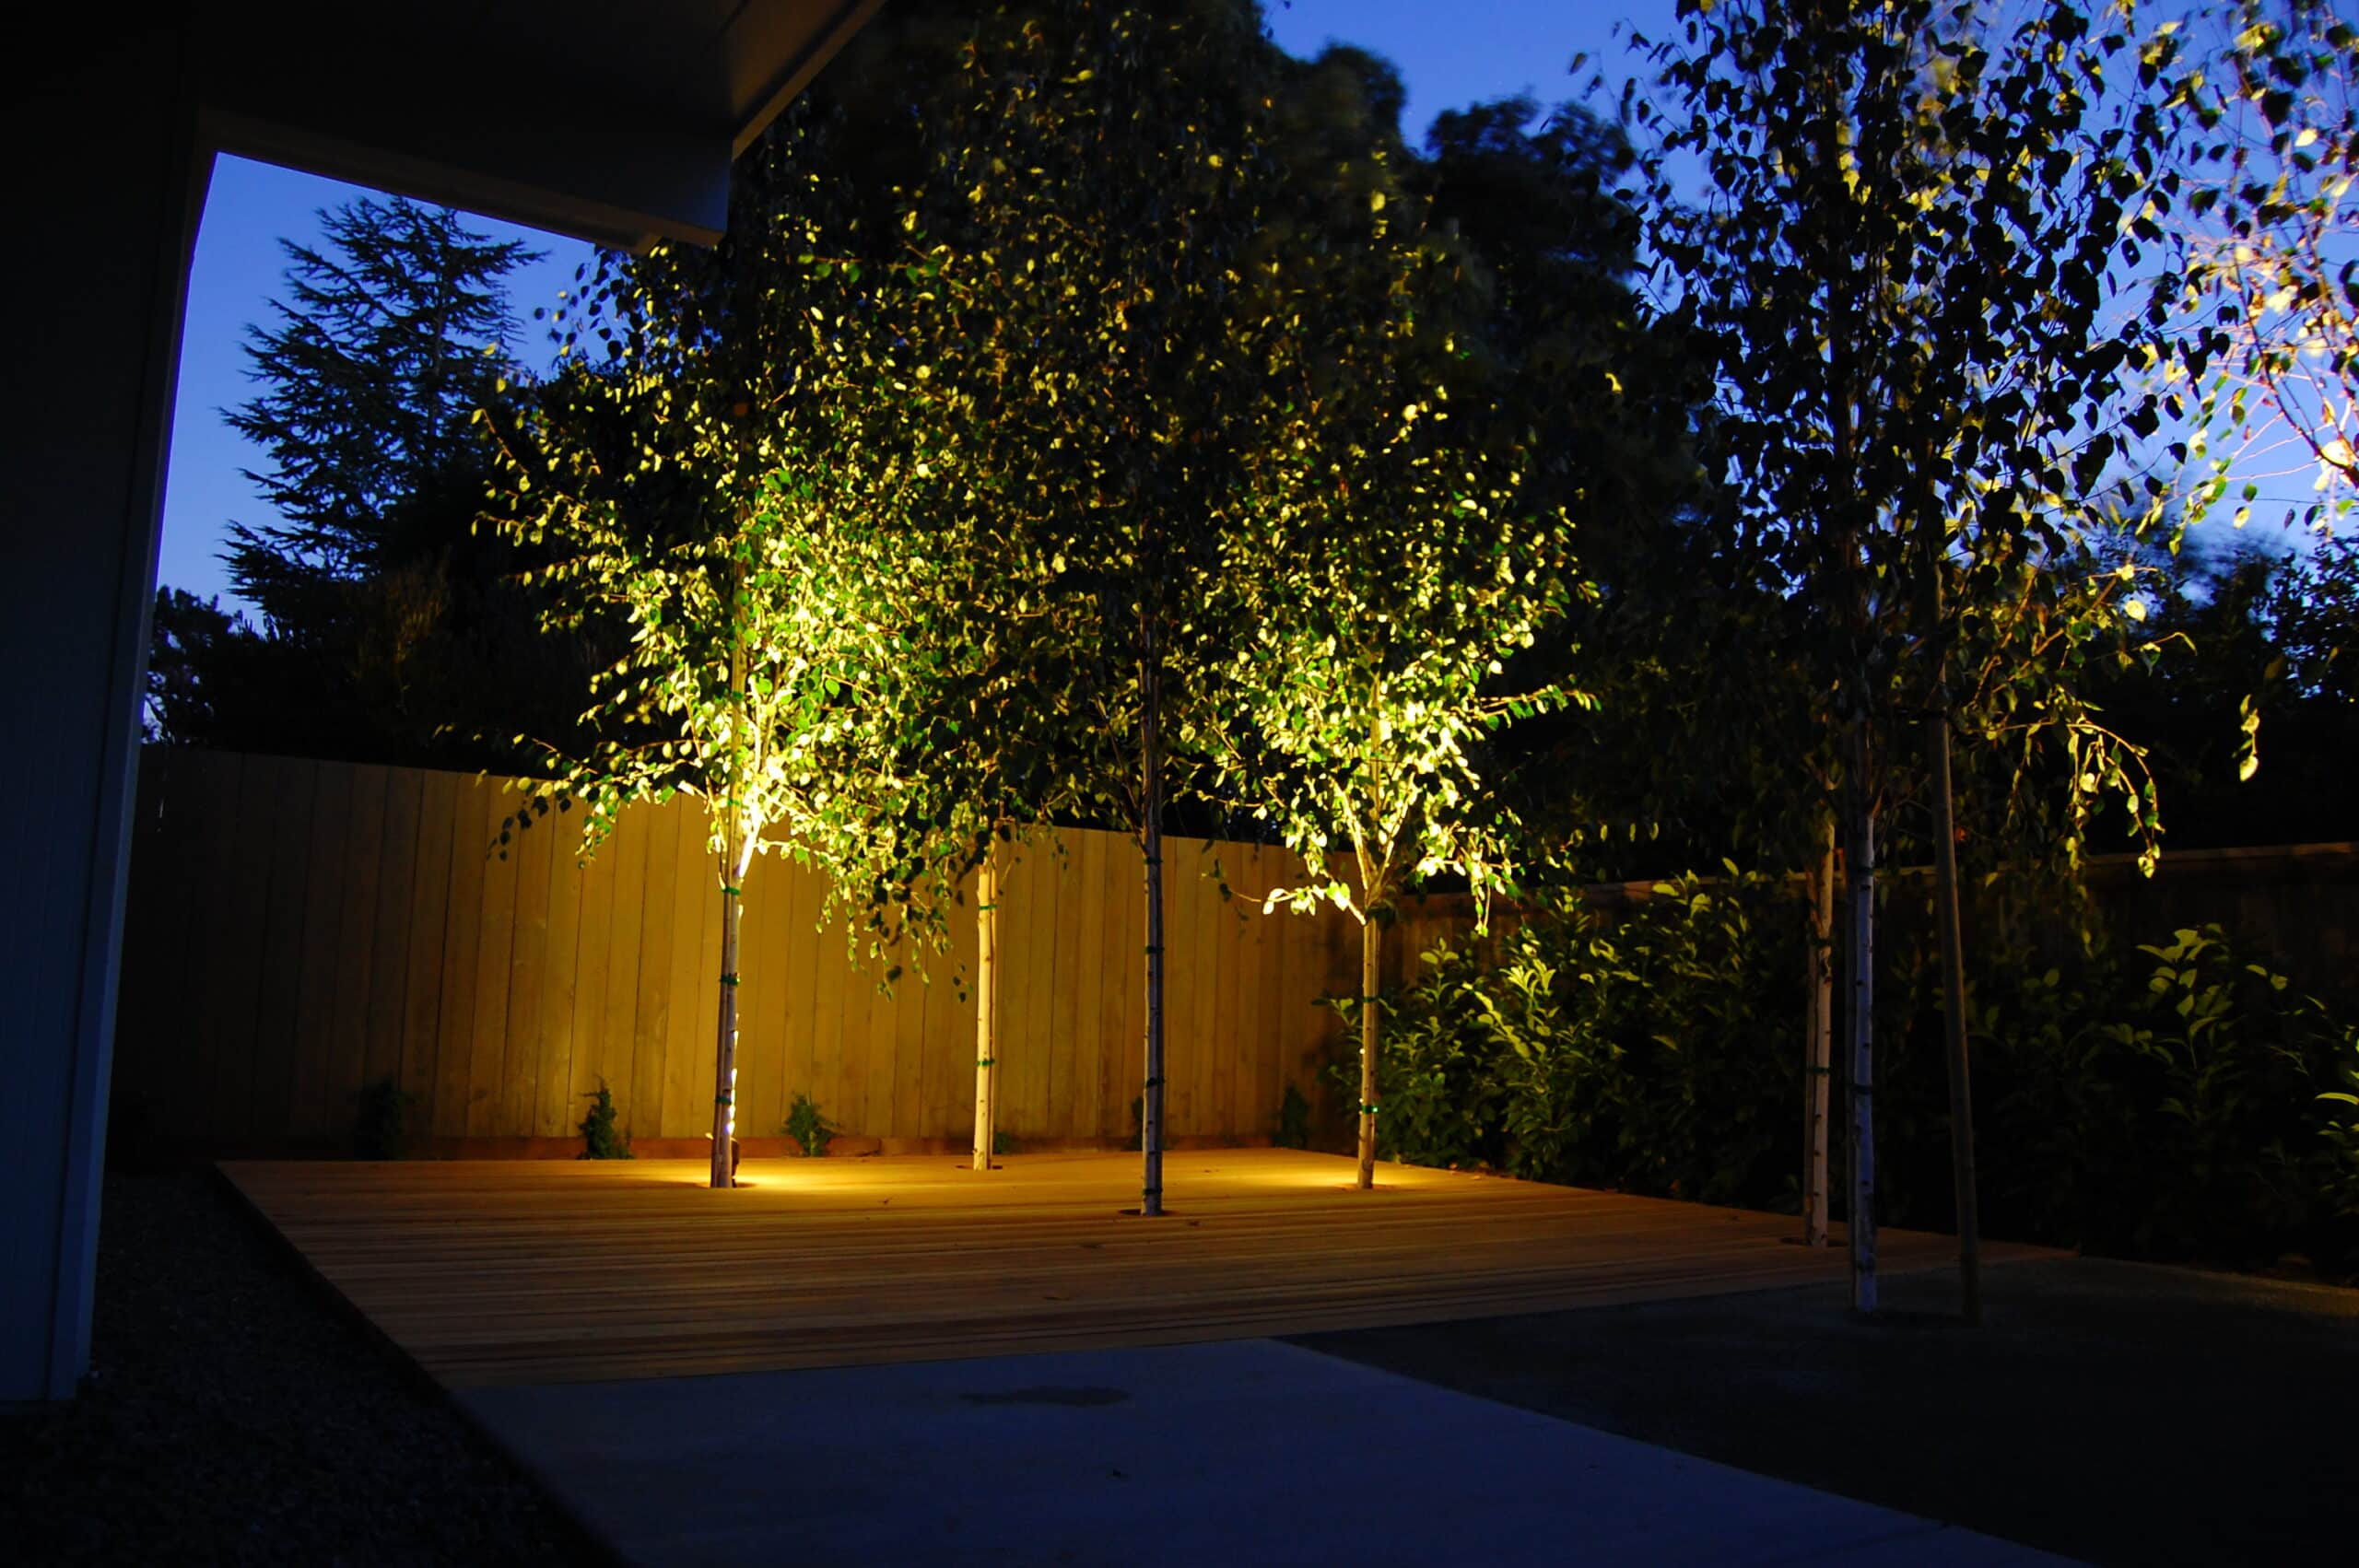 10 brightest solar spot lights for a shiny yard 1 scaled